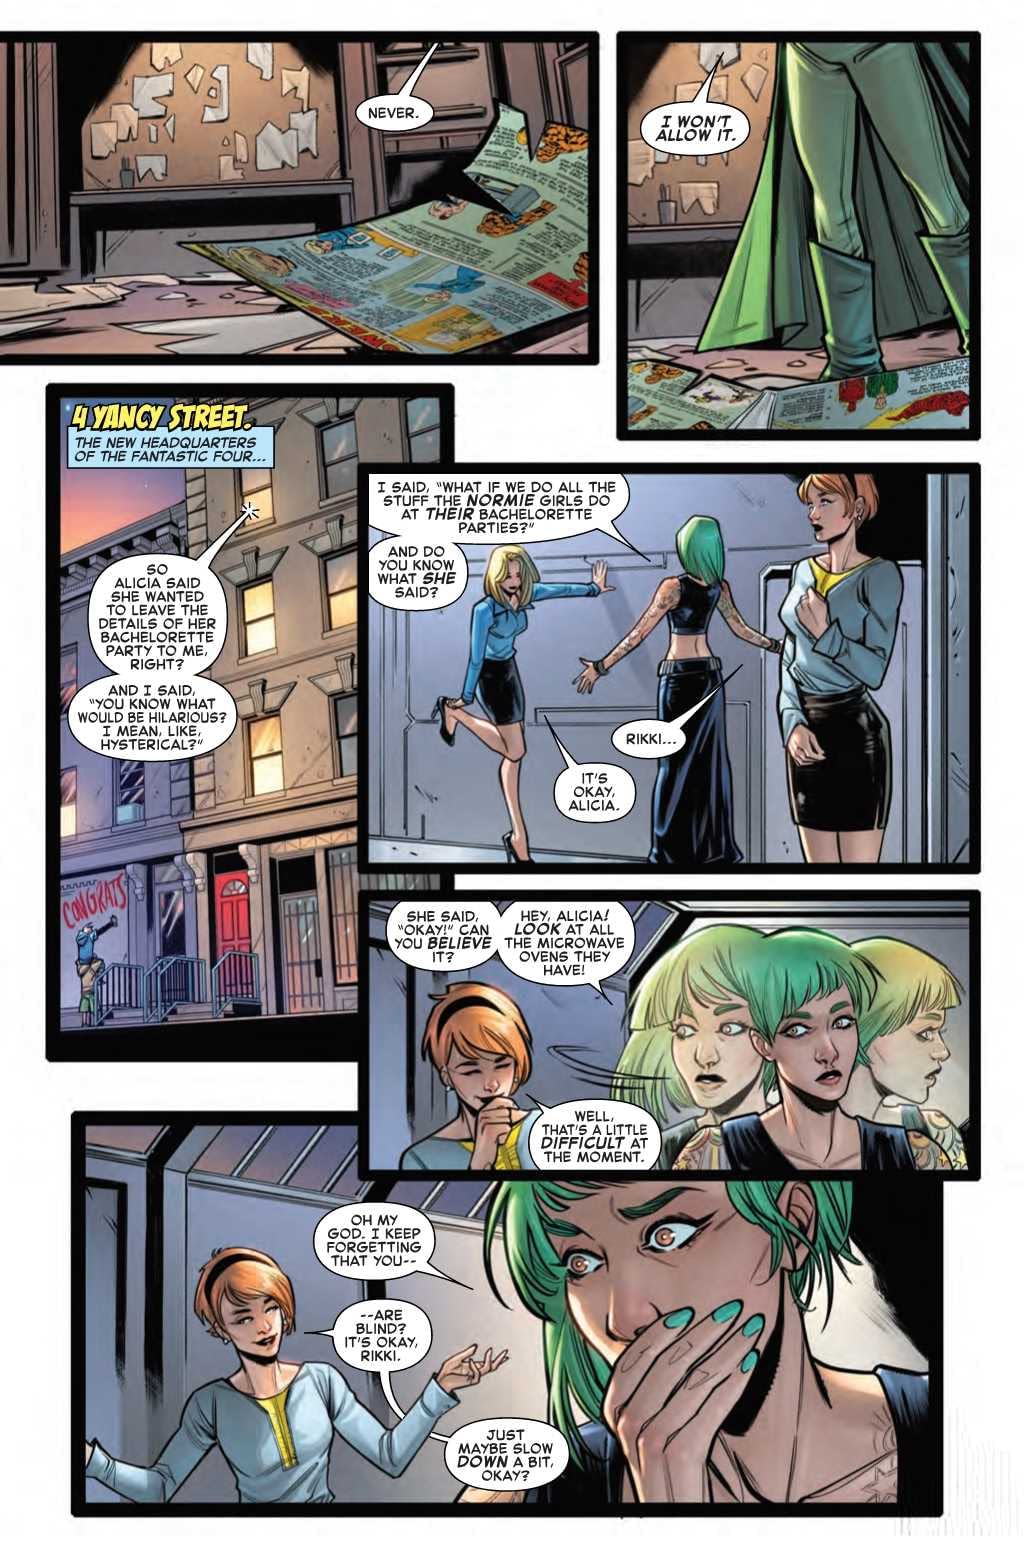 Ben Doesn't Want Any Shenanigans at Alicia's Bachelorette Party in Next Week's Fantastic Four Wedding Issue